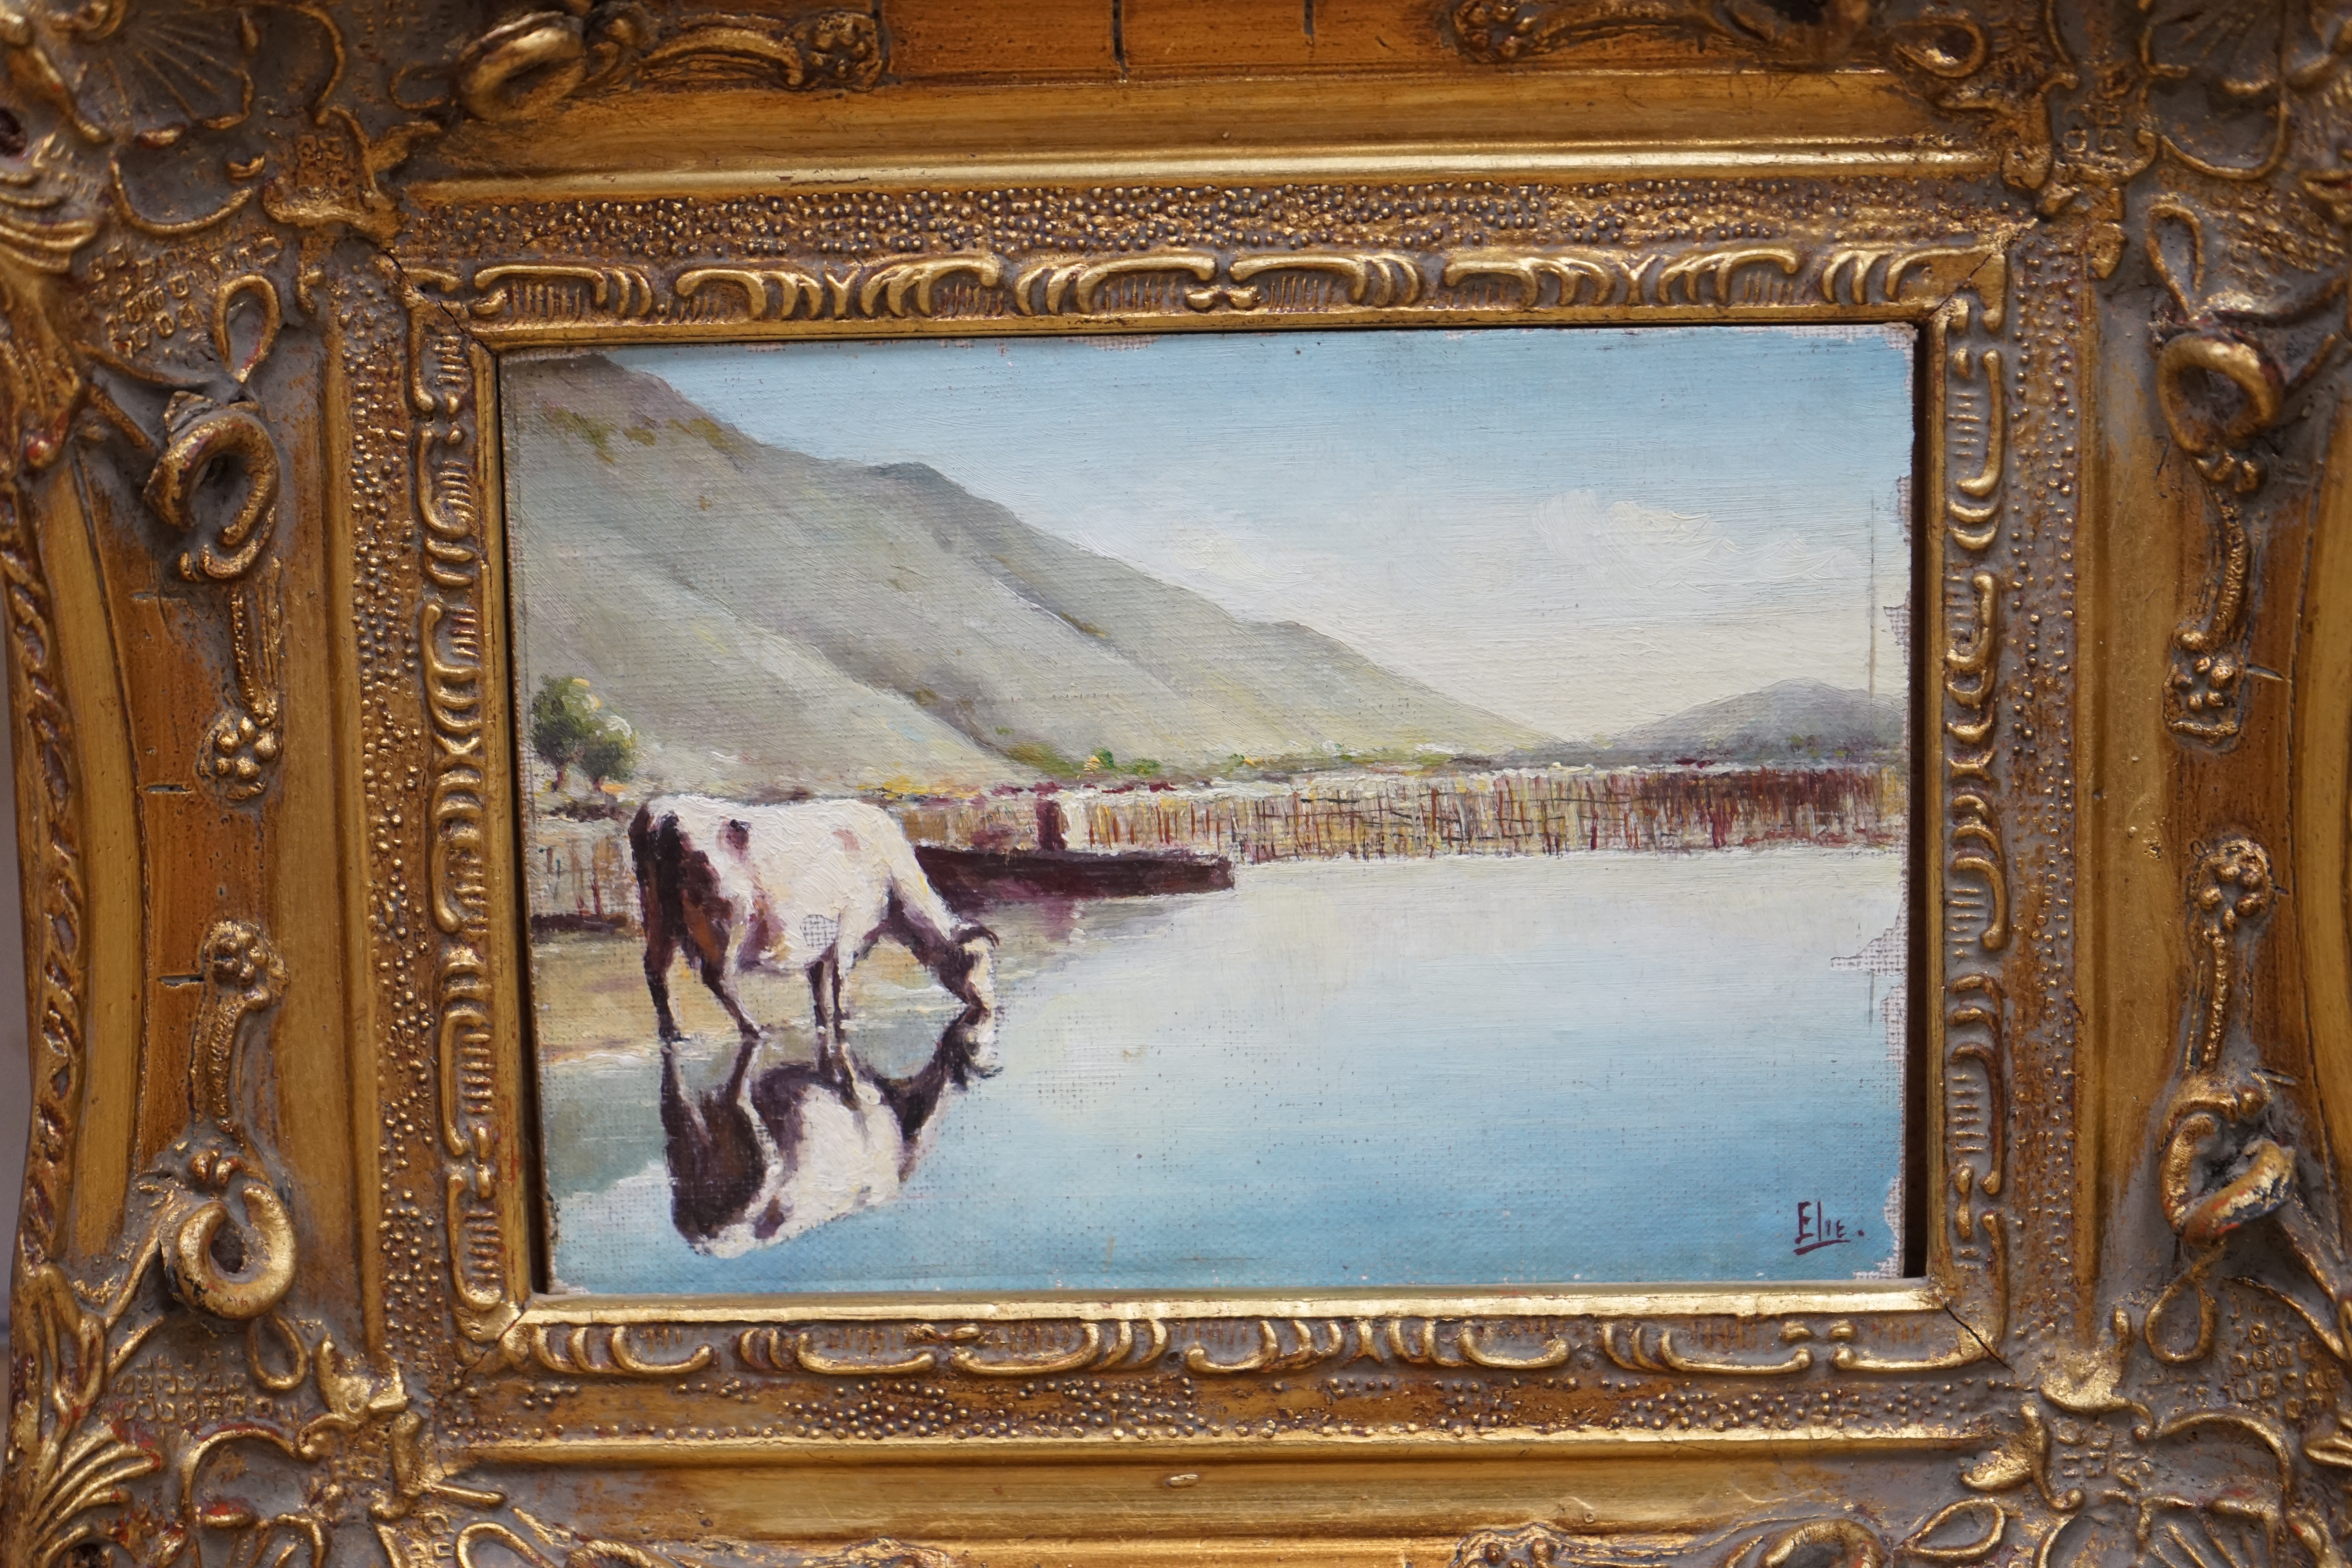 Two decorative oils on board, Flock of sheep before a landscape and Riverscape with cattle, largest 24 x 19cm, each gilt framed. Condition - fair